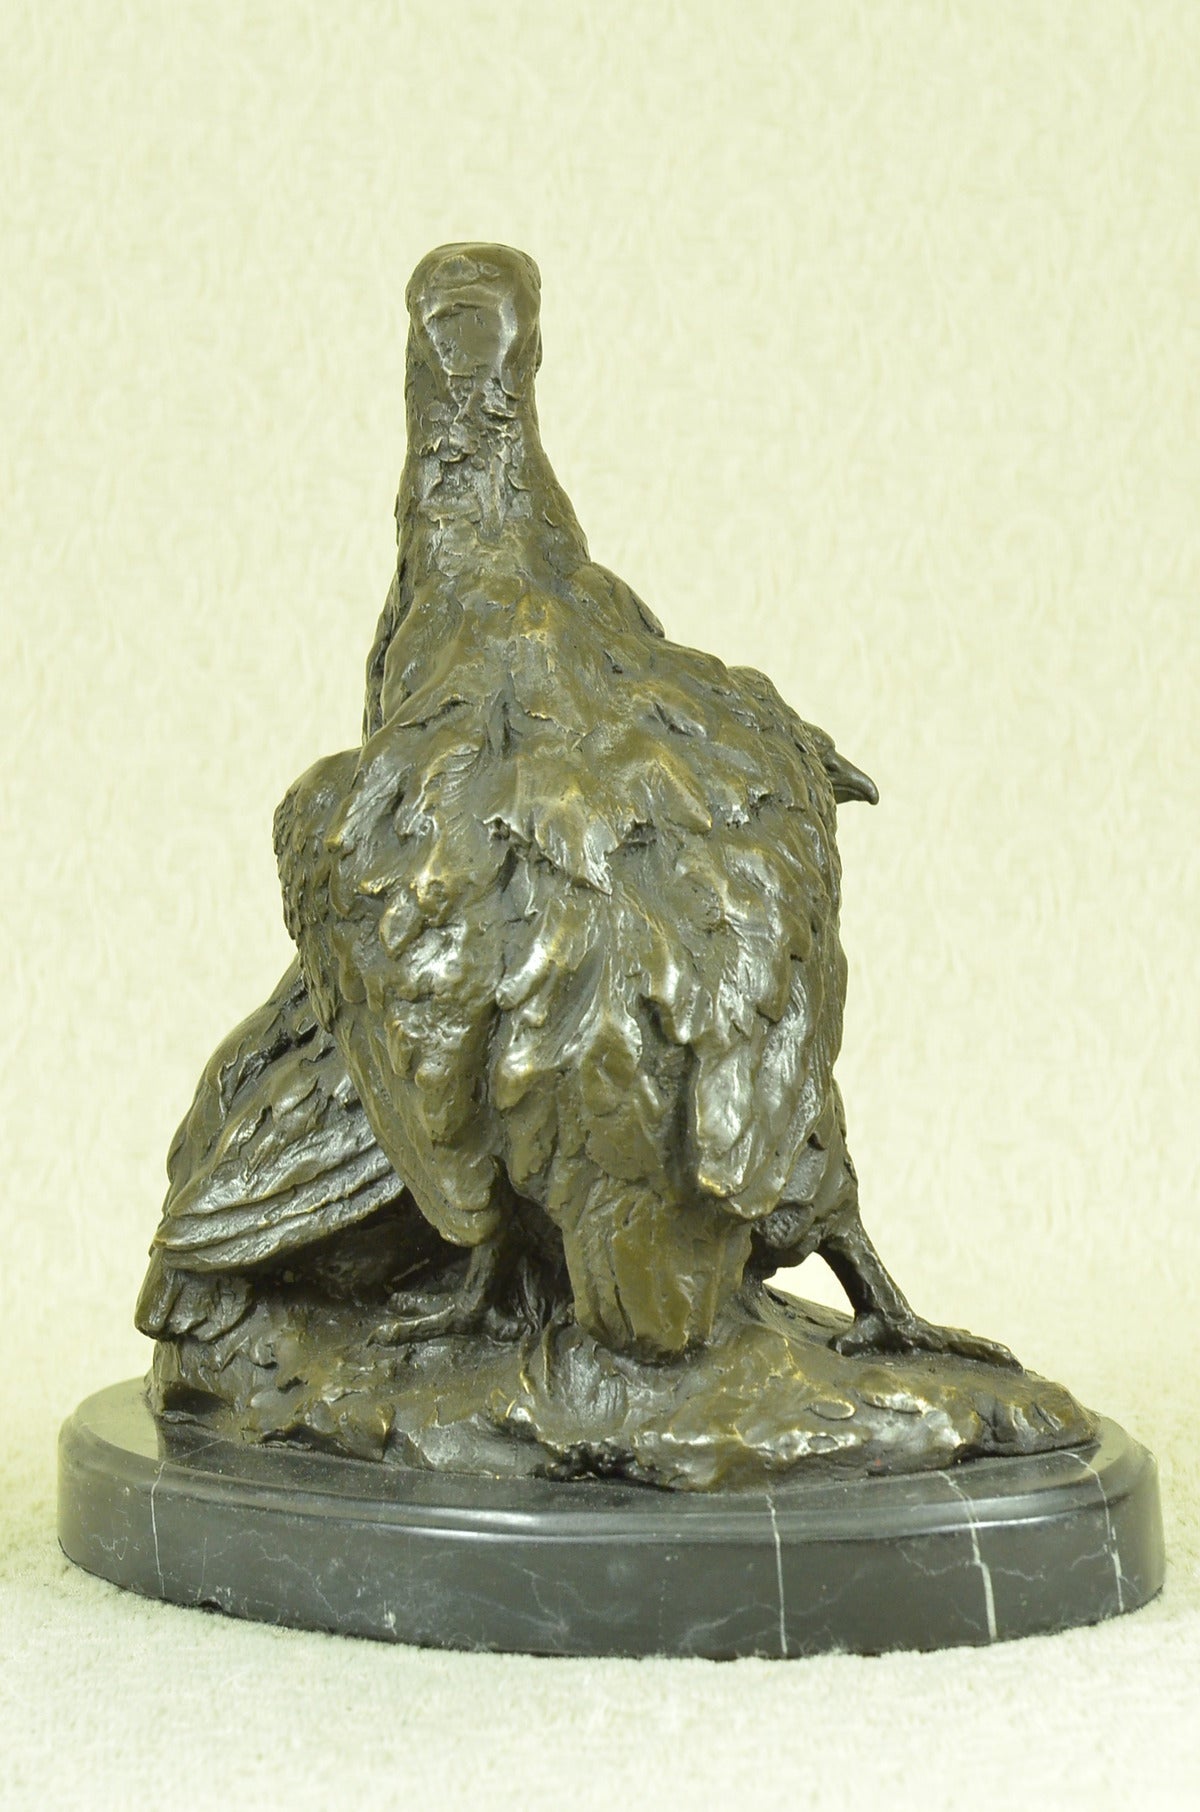 Have one to sell? Sell now Details about  Handcrafted bronze sculpture SALE Eagl